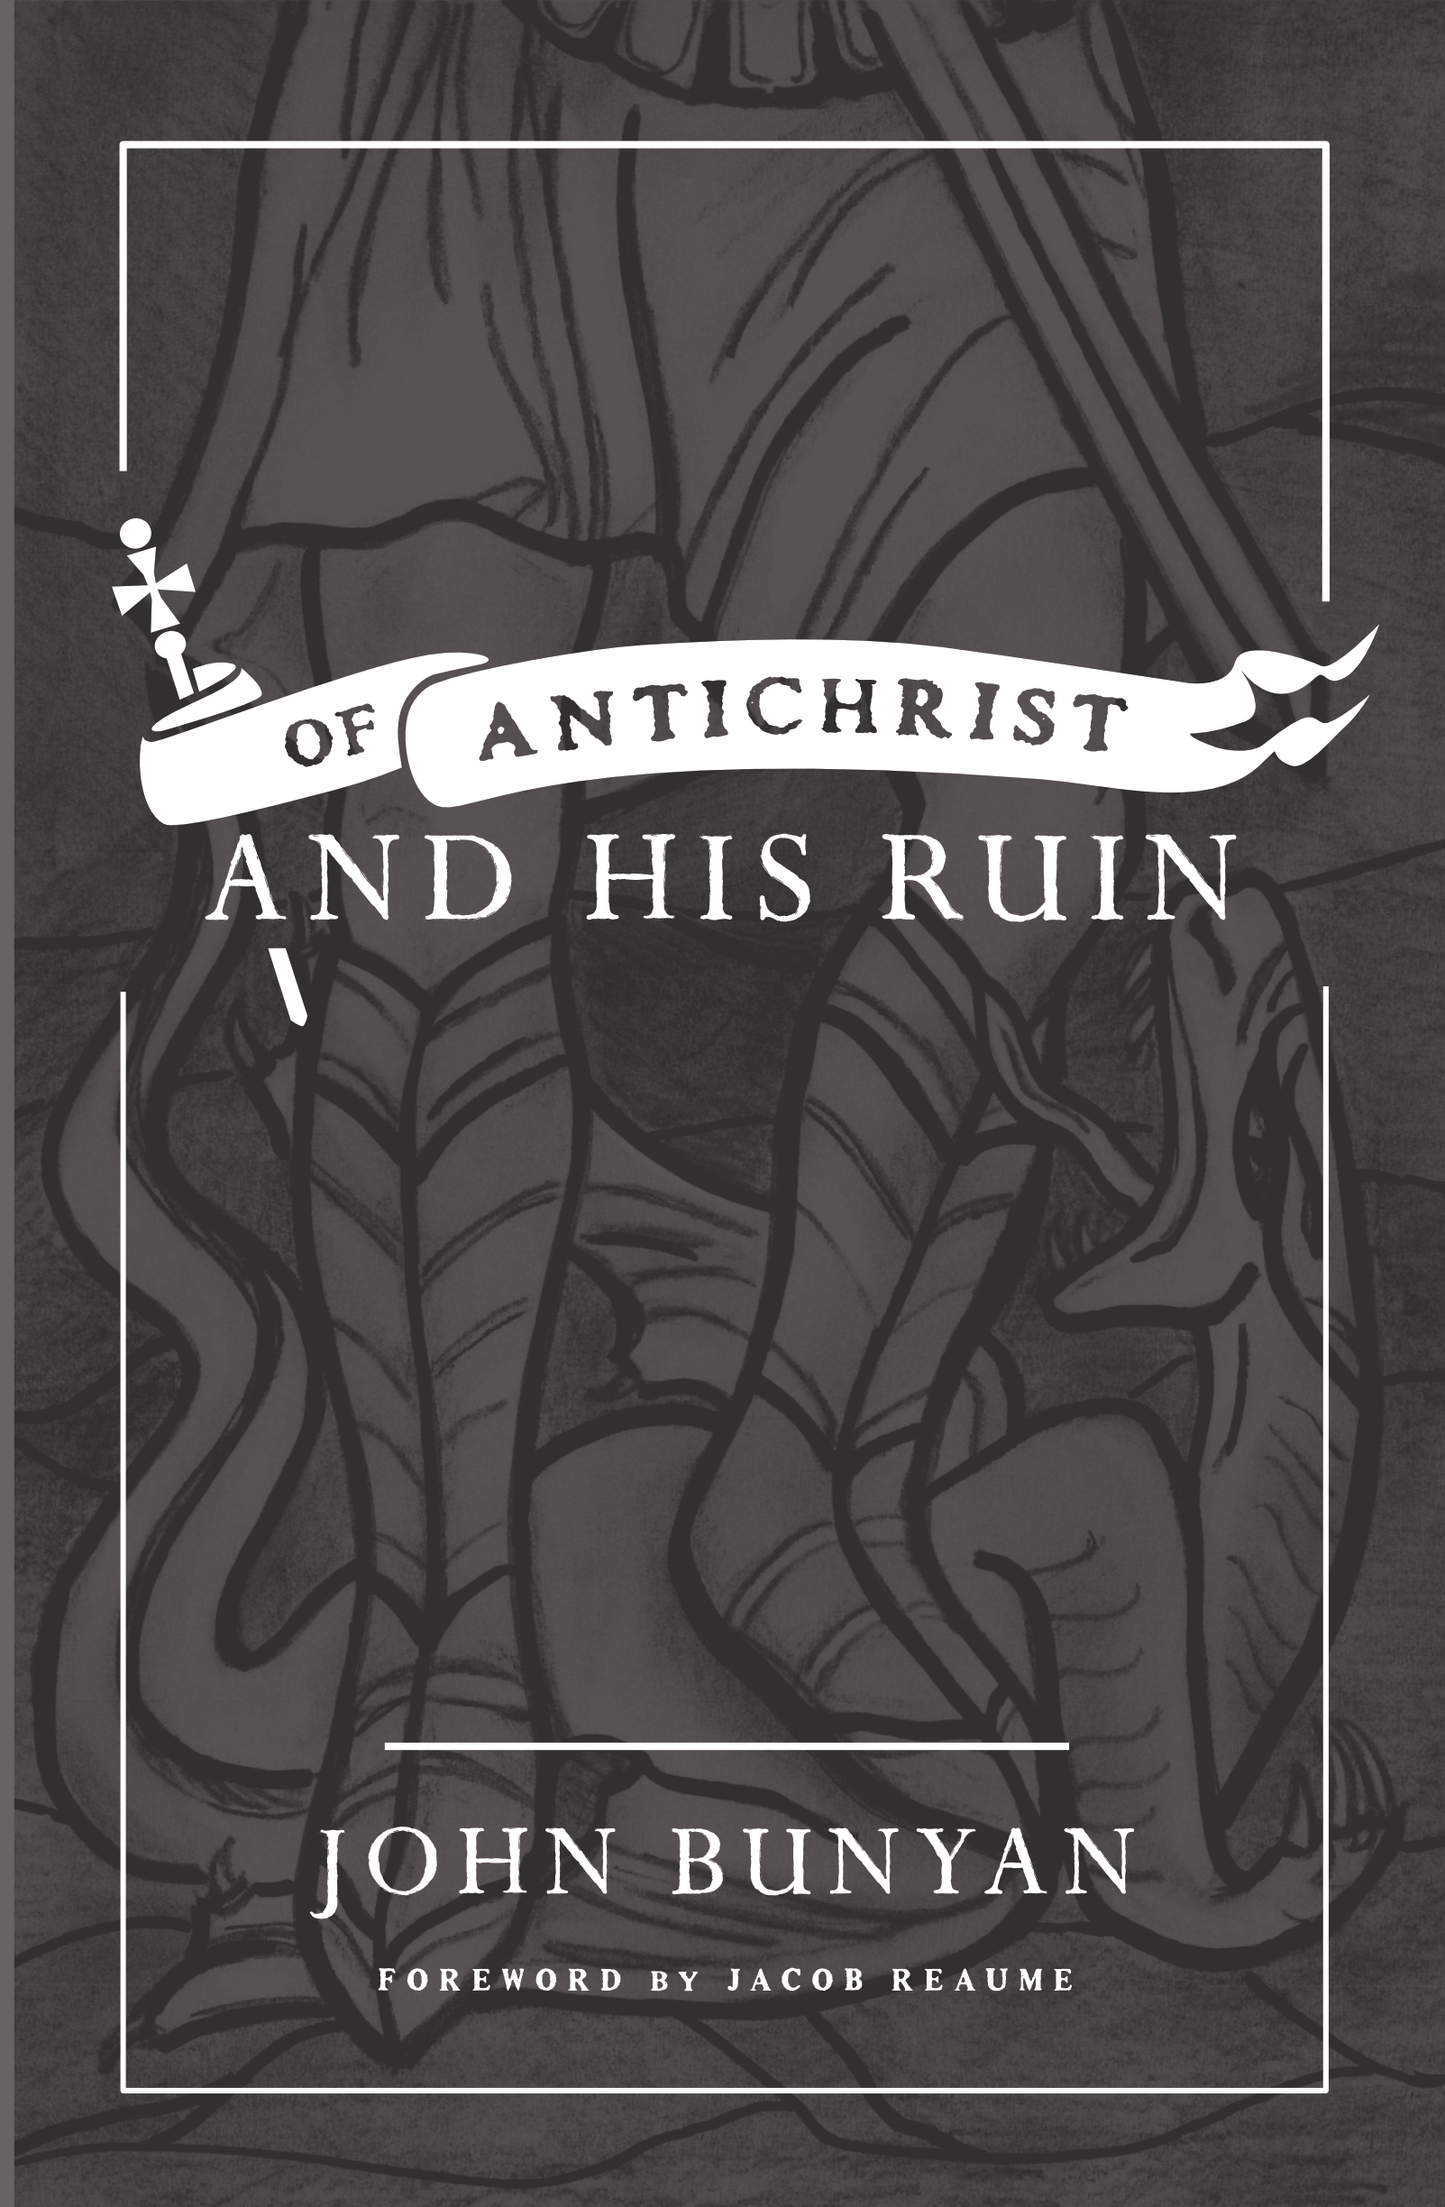 Of Antichrist, and His Ruin: EBOOK